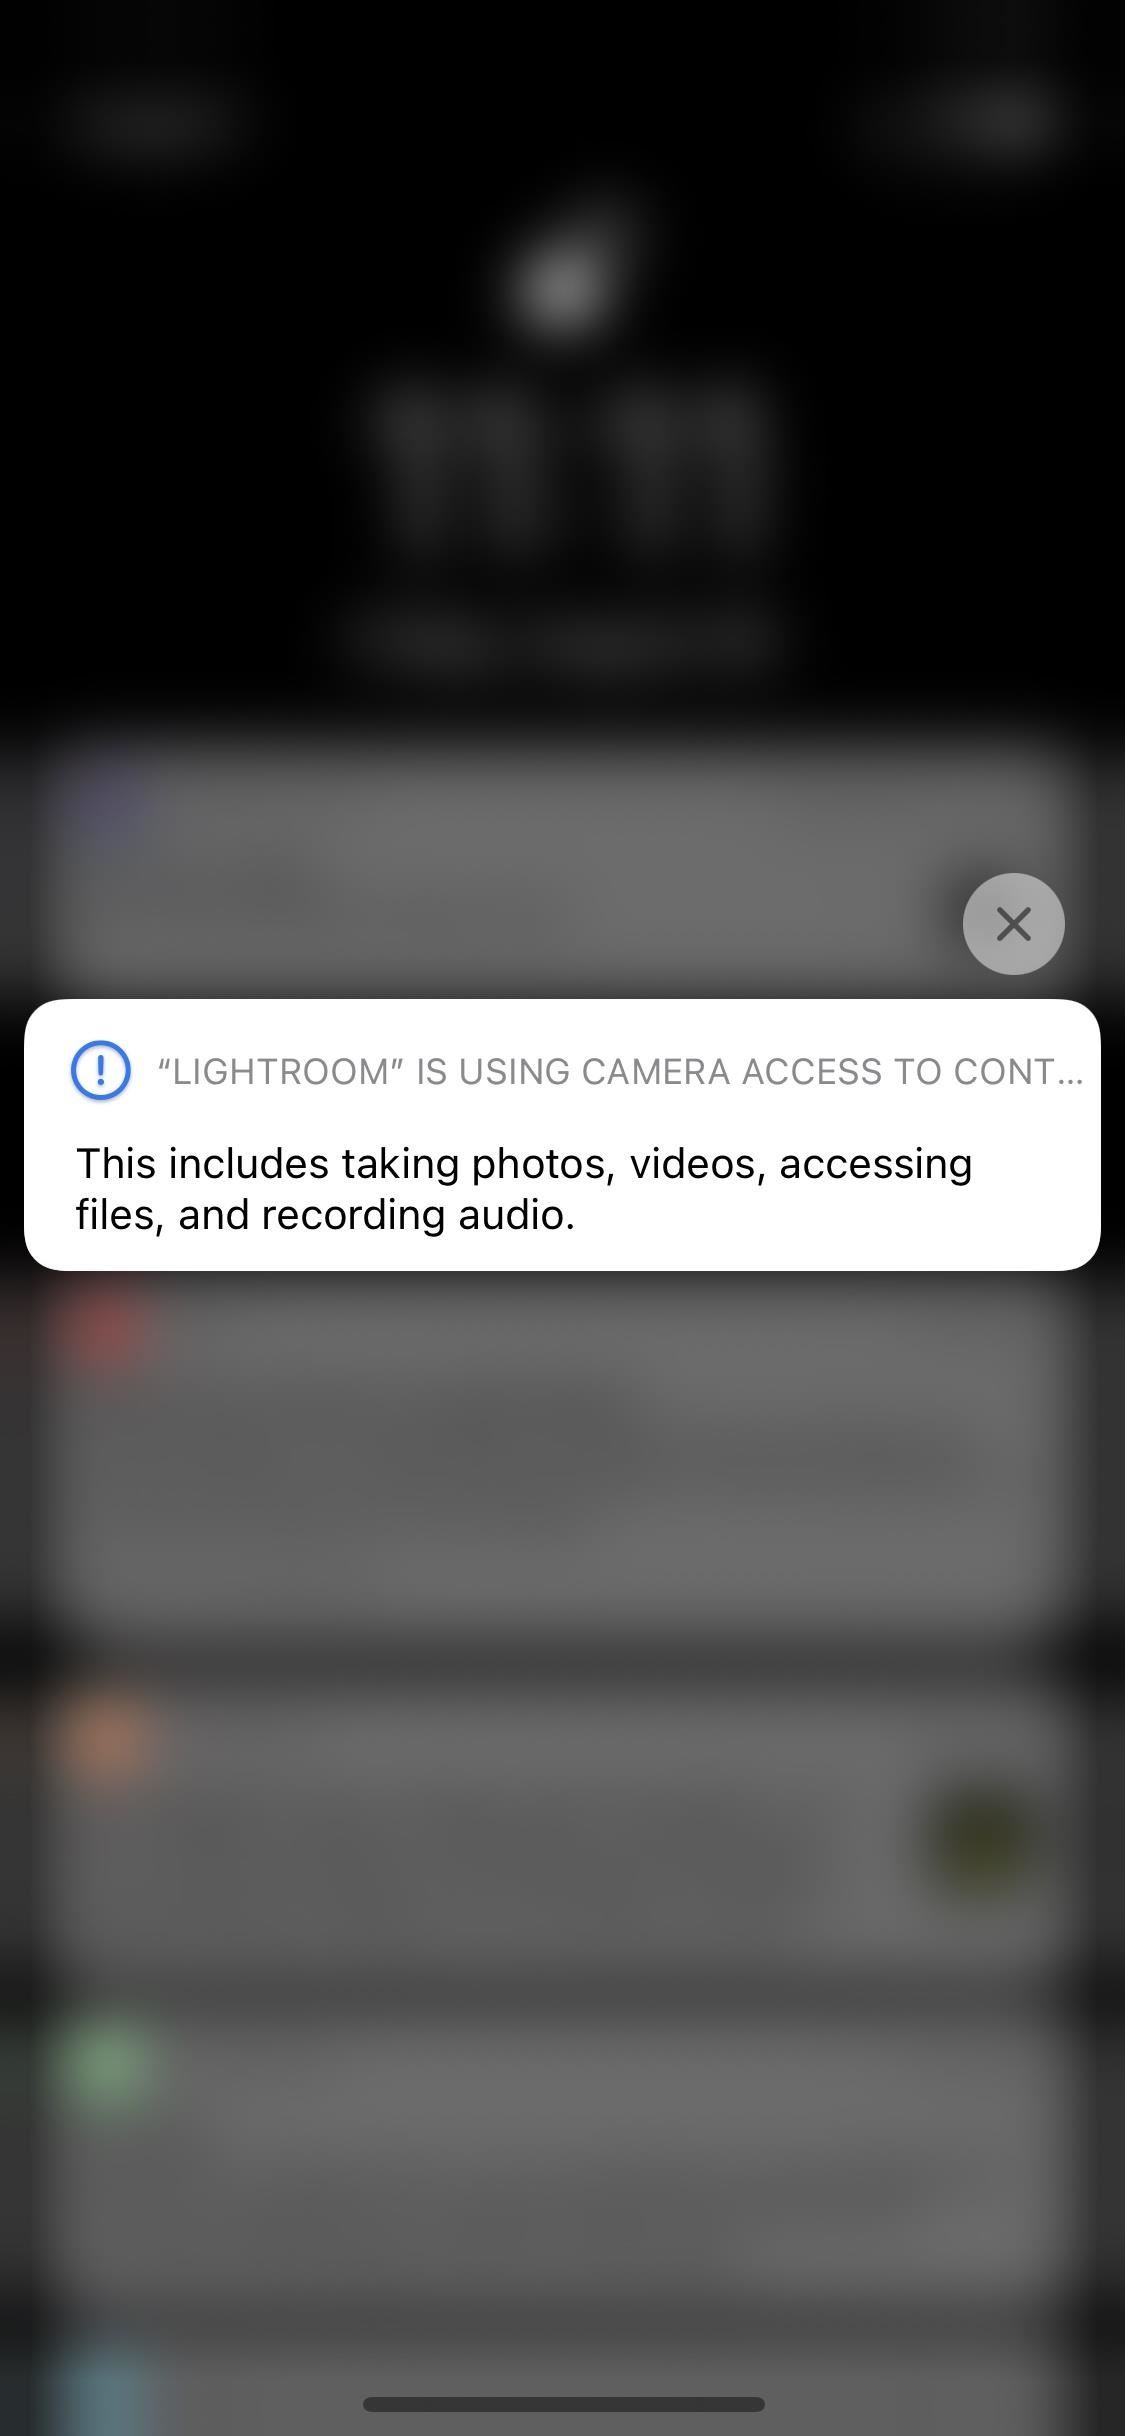 iOS 14's New Security Alerts Rat Out Apps for Privacy Invasions on Your iPhone & It'll Only Get Better